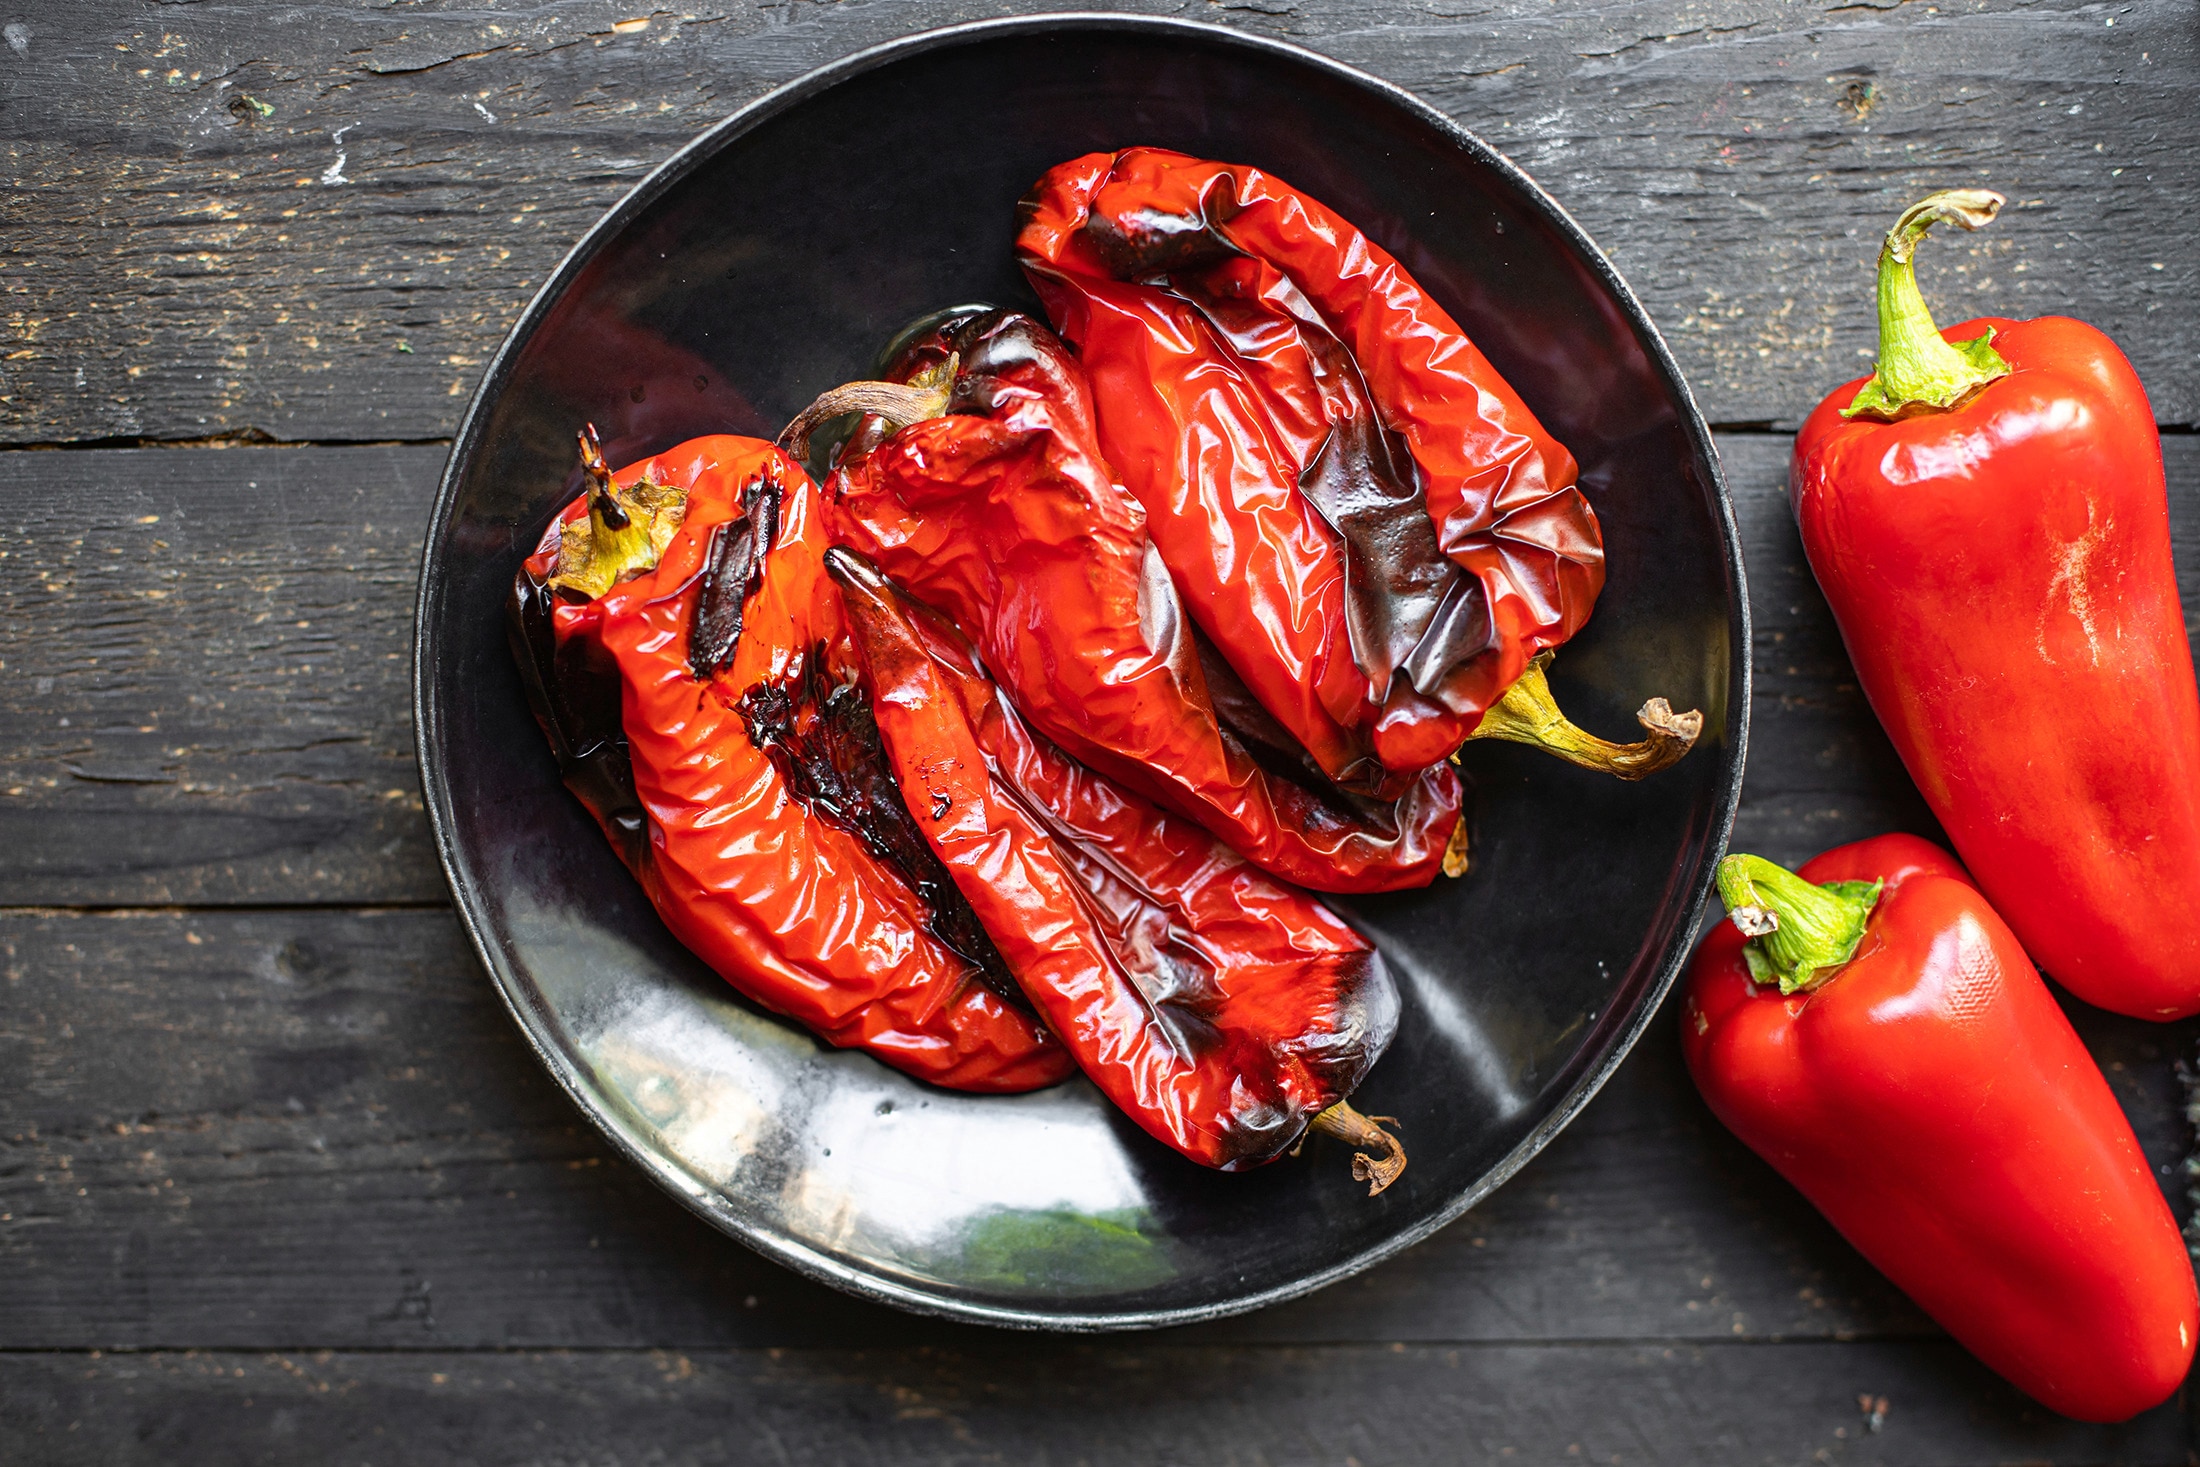 A plate of roasted red bell peppers on a dark wooden tabletop